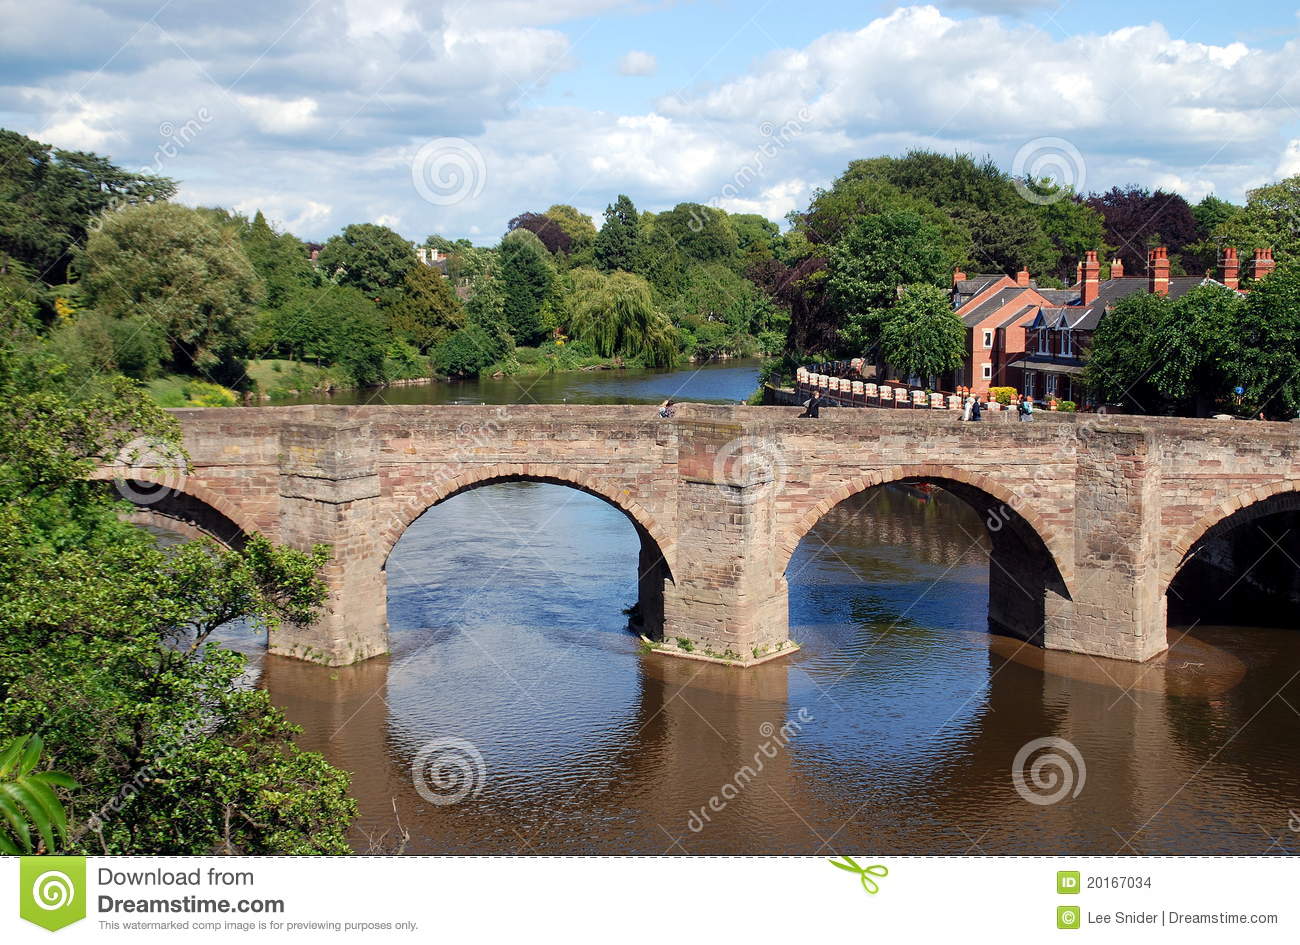 Medieval Stone Bridge With Four Arches Spans The Tranquil River Wye